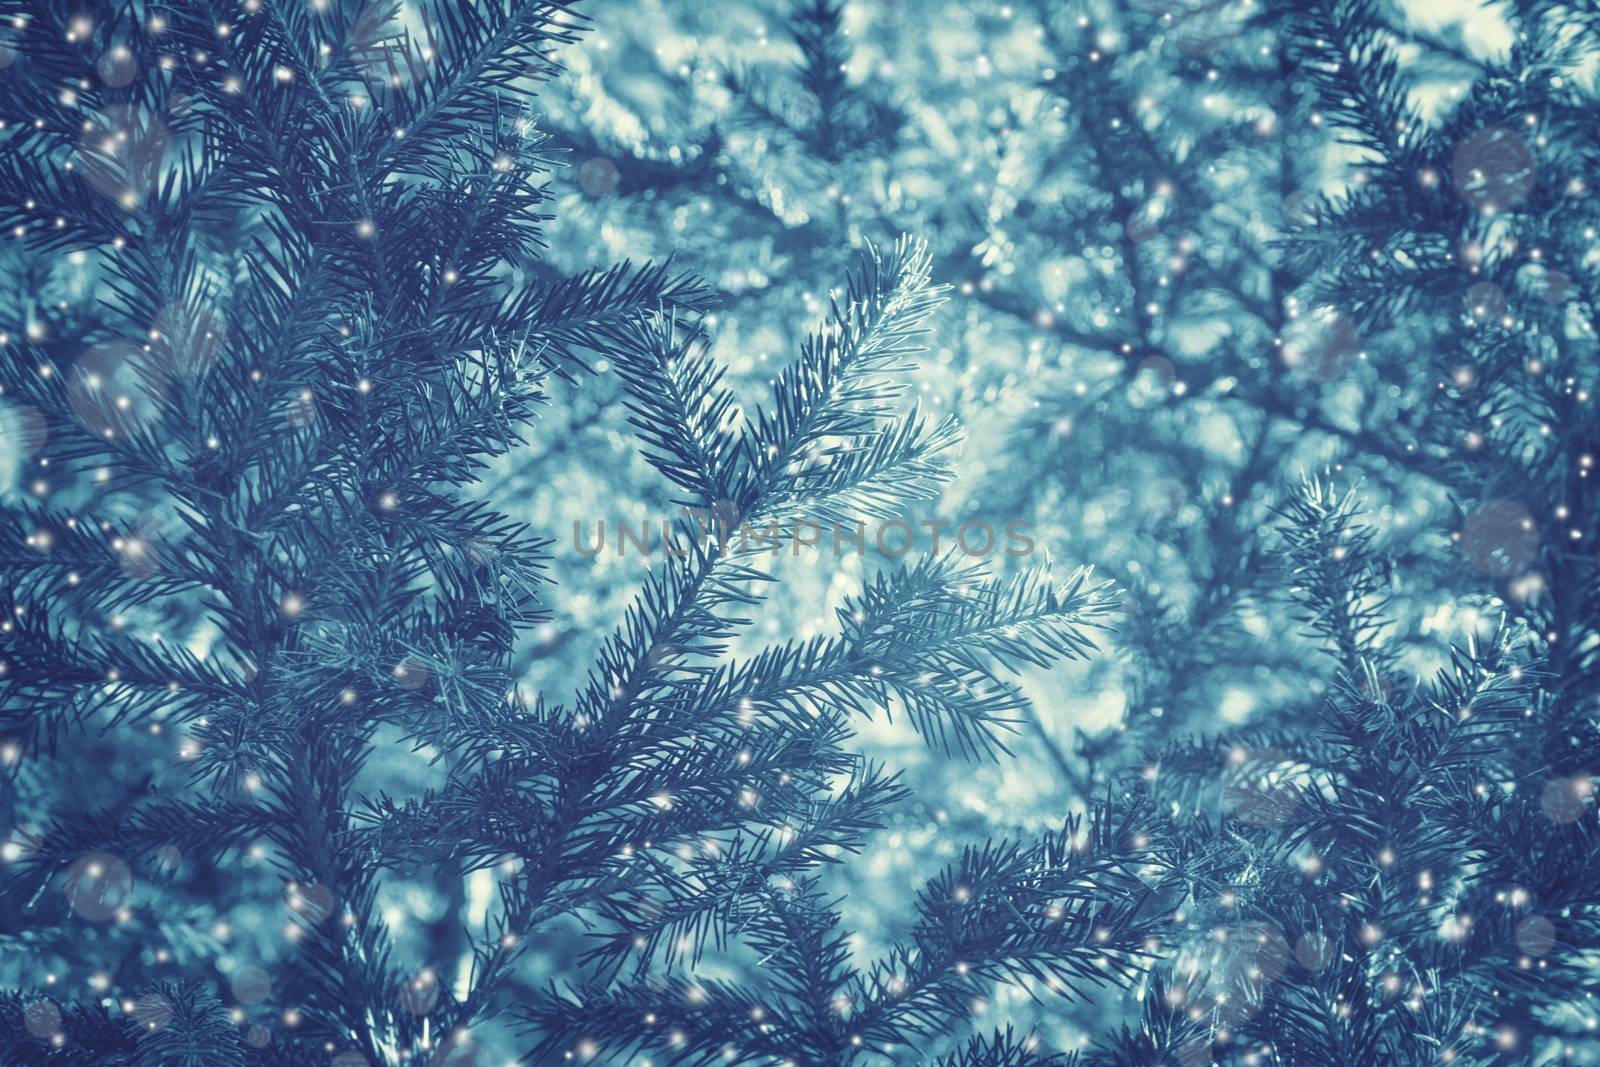 Creative blue winter New Year background with pine branches and snowflakes